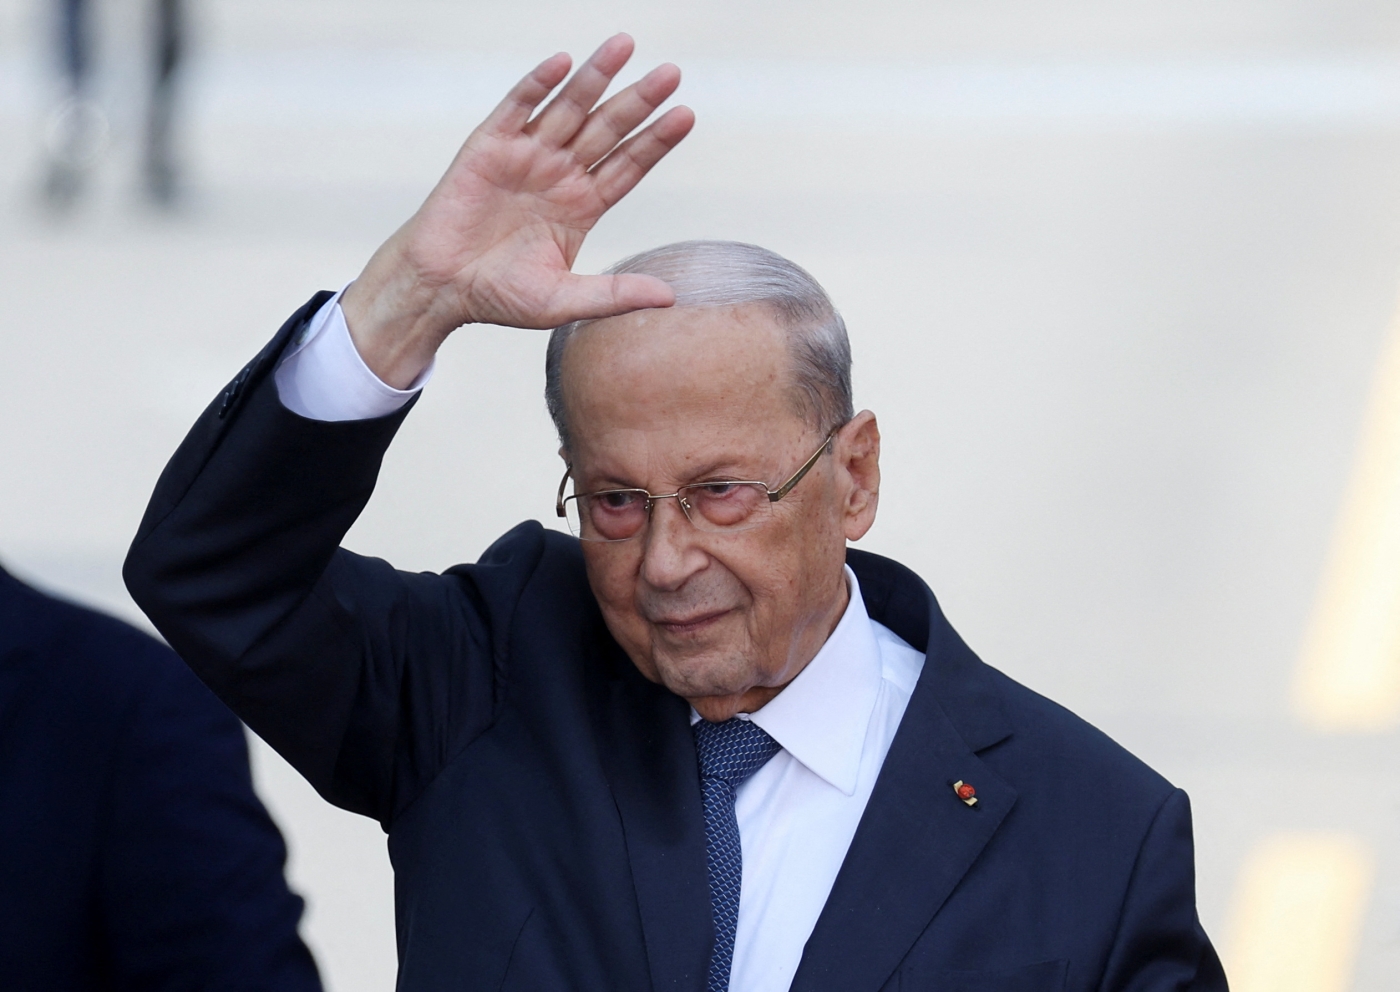 Lebanese outgoing President Michel gestures to his supporters as he leaves the presidential palace a day before his six-year term officially ends, in Baabda, Lebanon 30 October 2022 (Reuters)